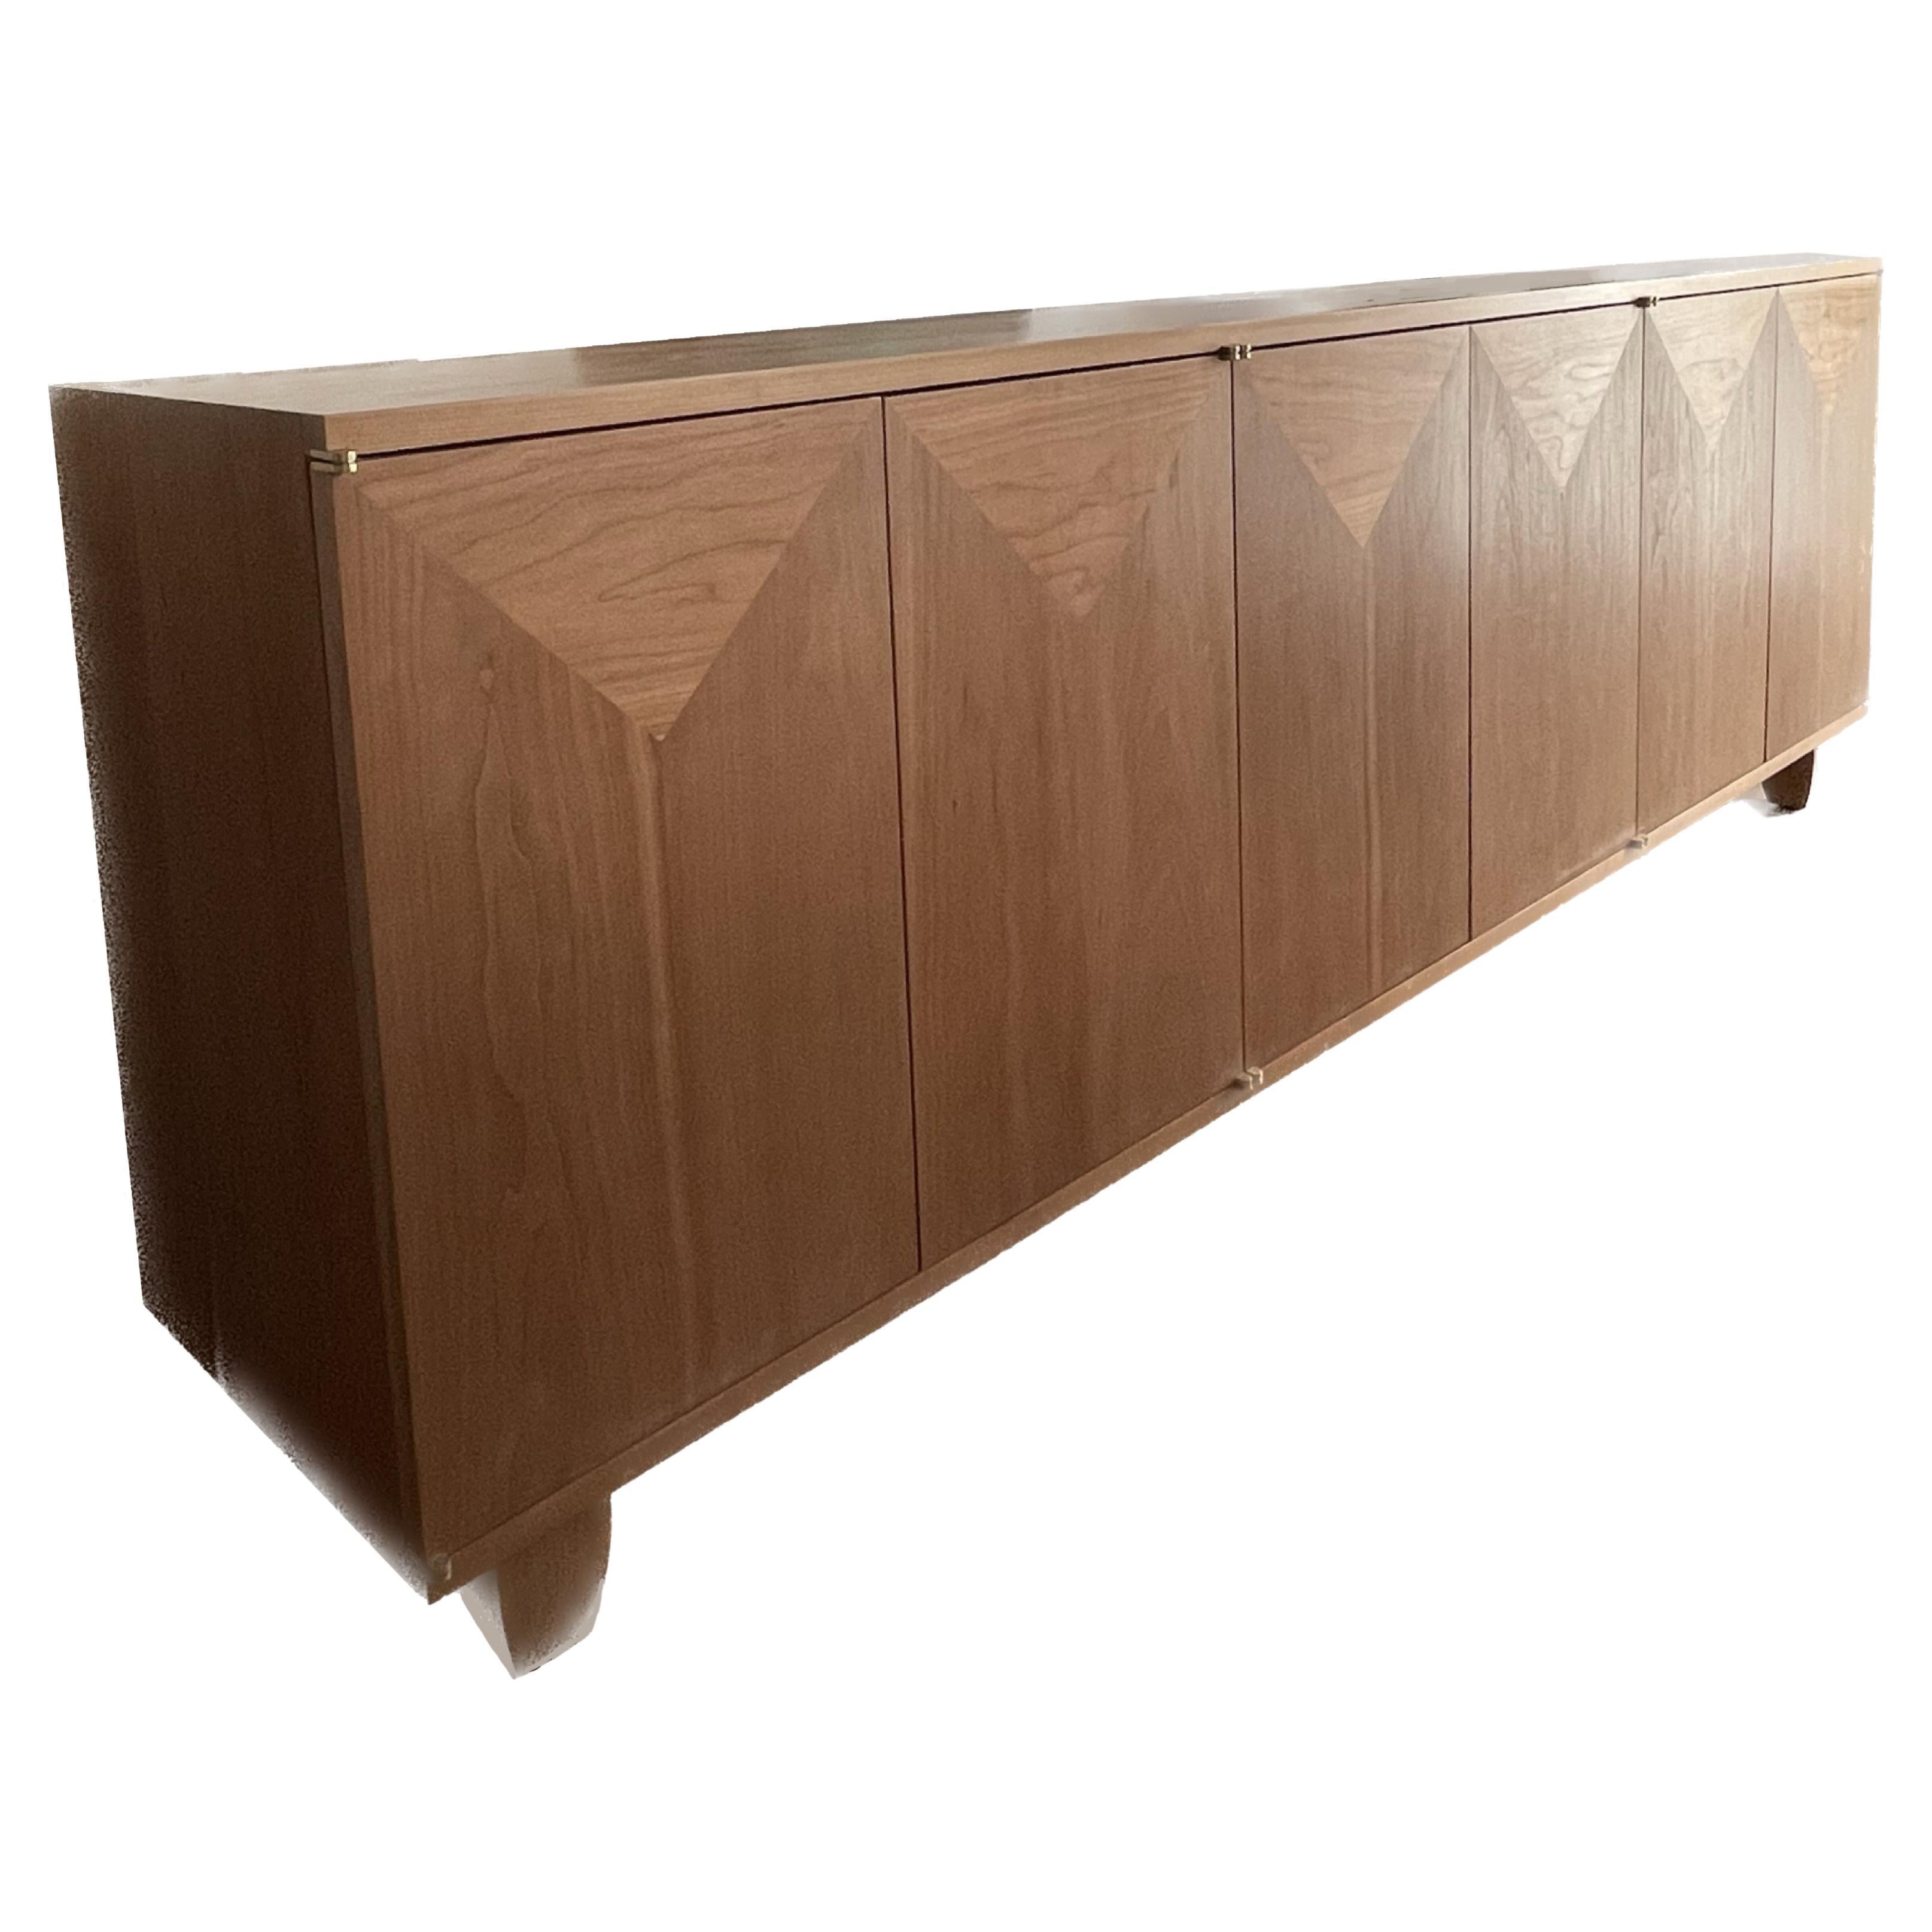 TK Cherry wood Sideboard For Sale